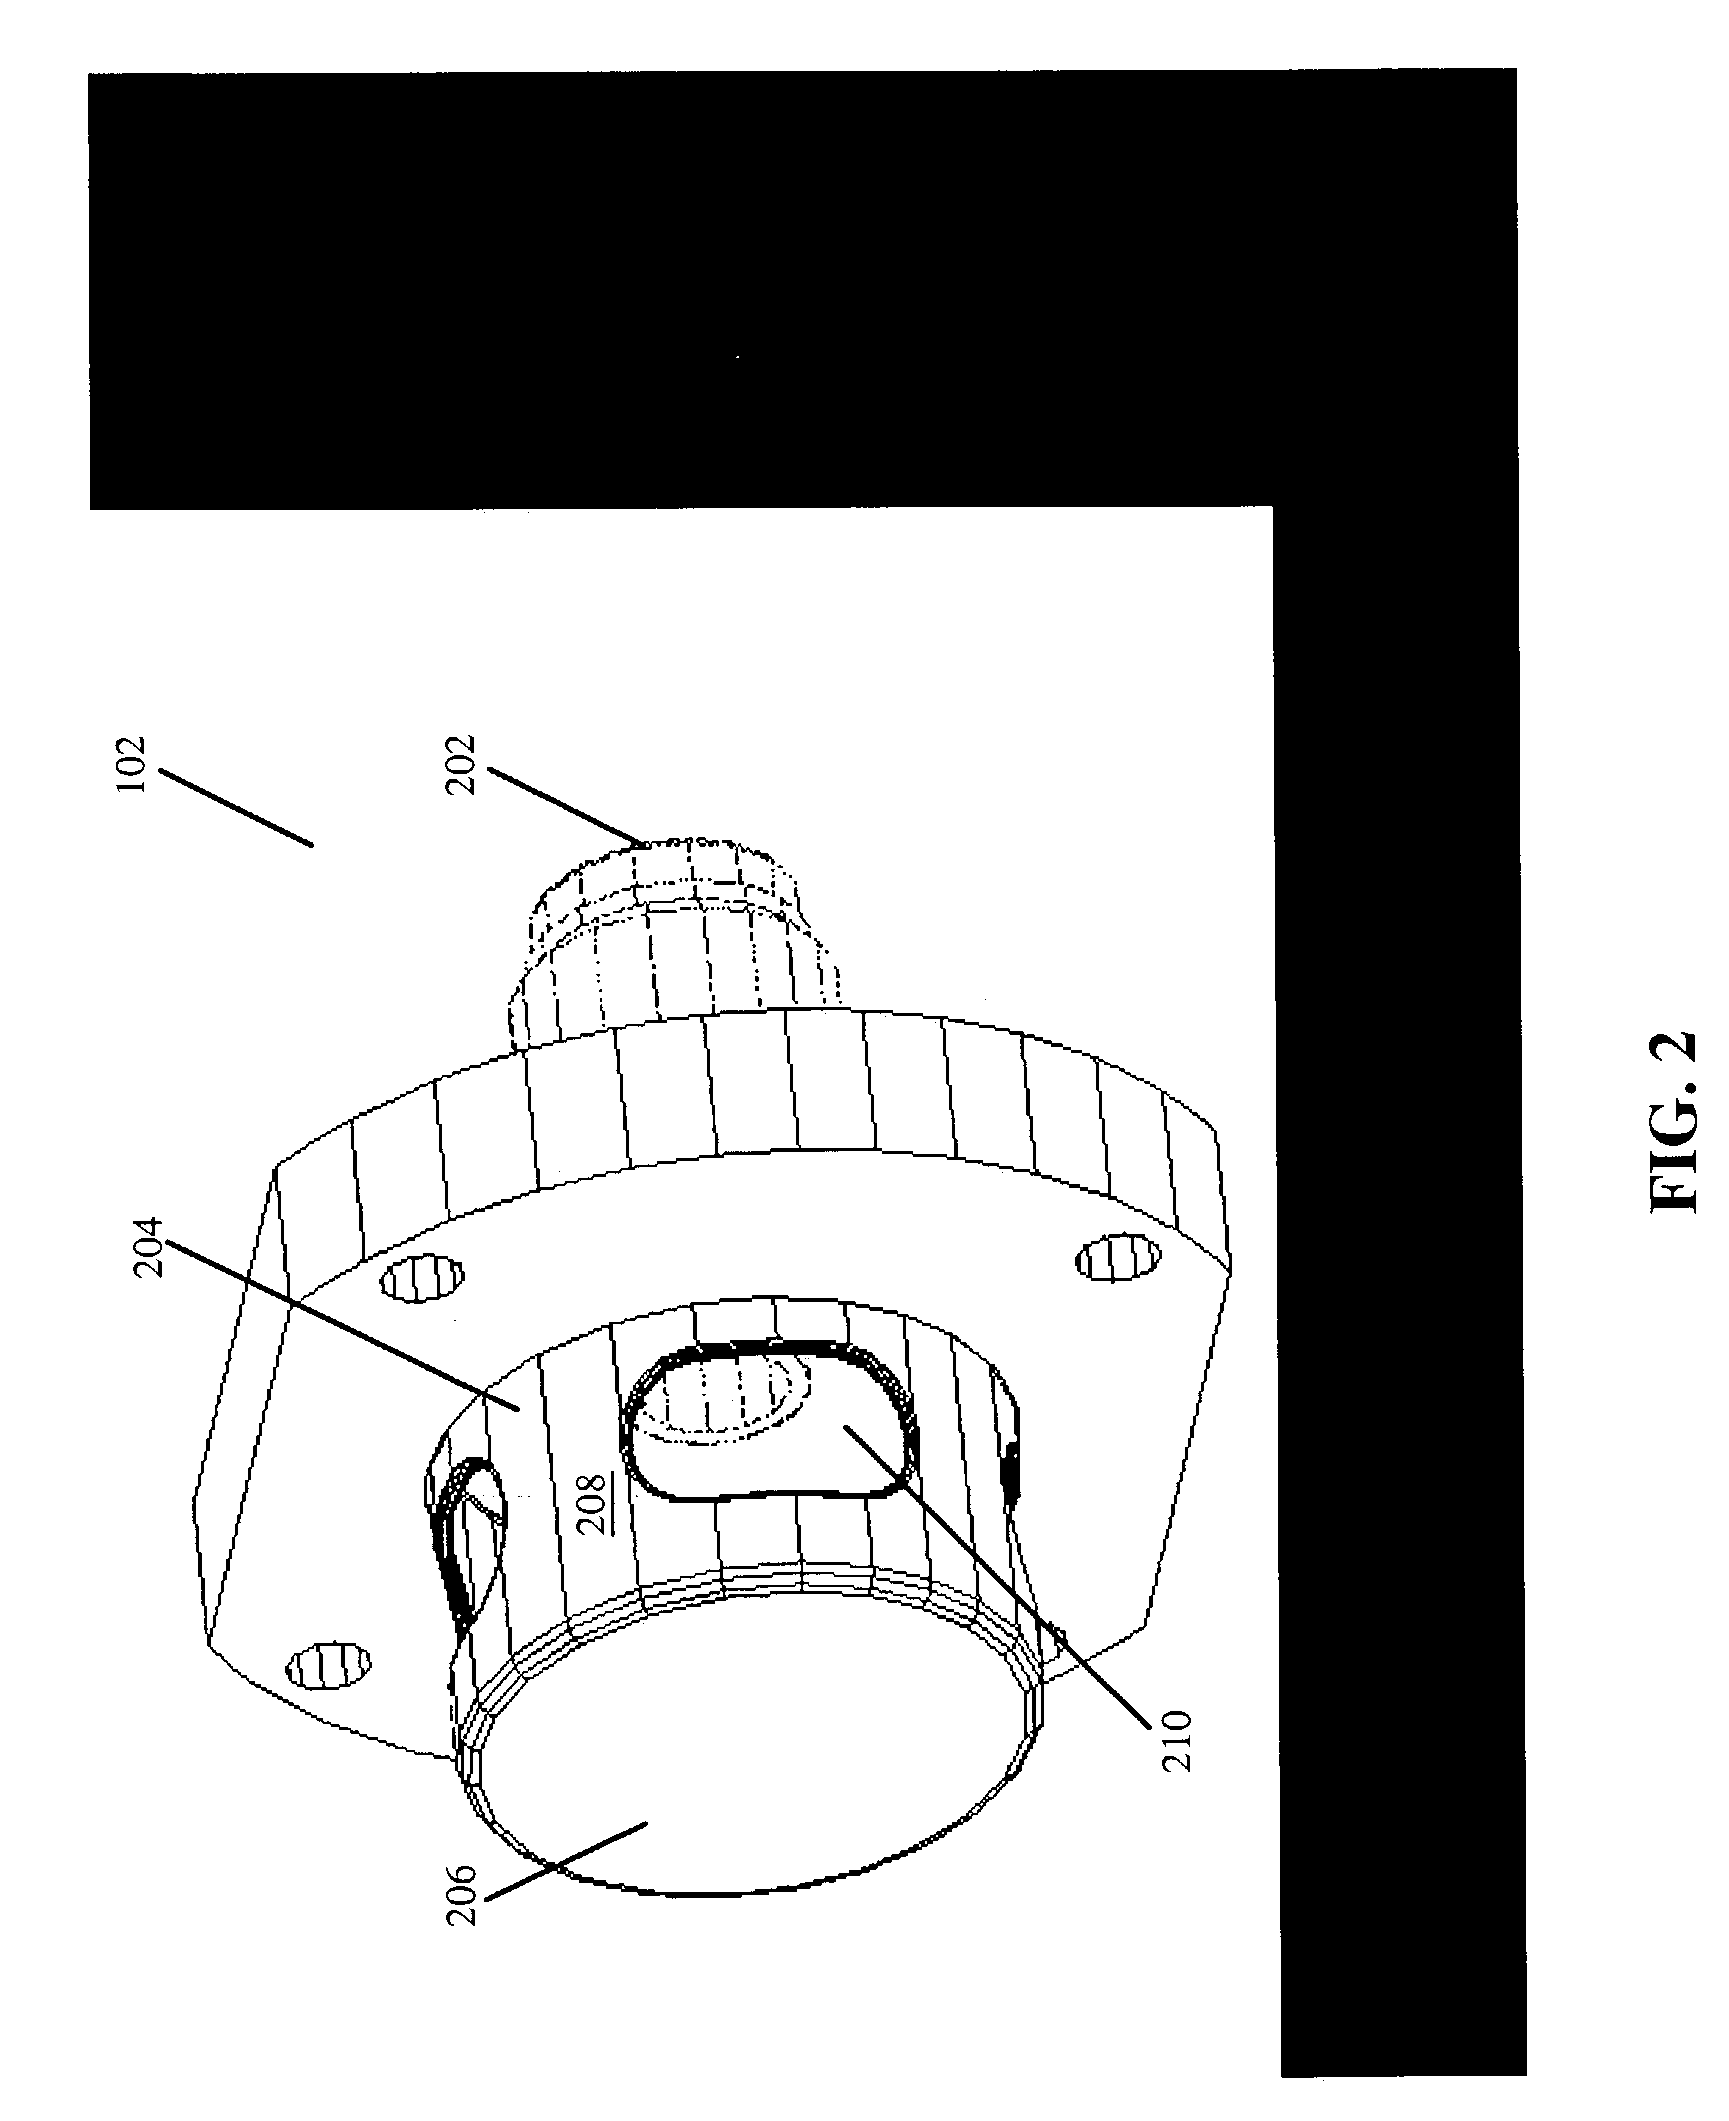 Reaction enhancing gas feed for injecting gas into a plasma chamber